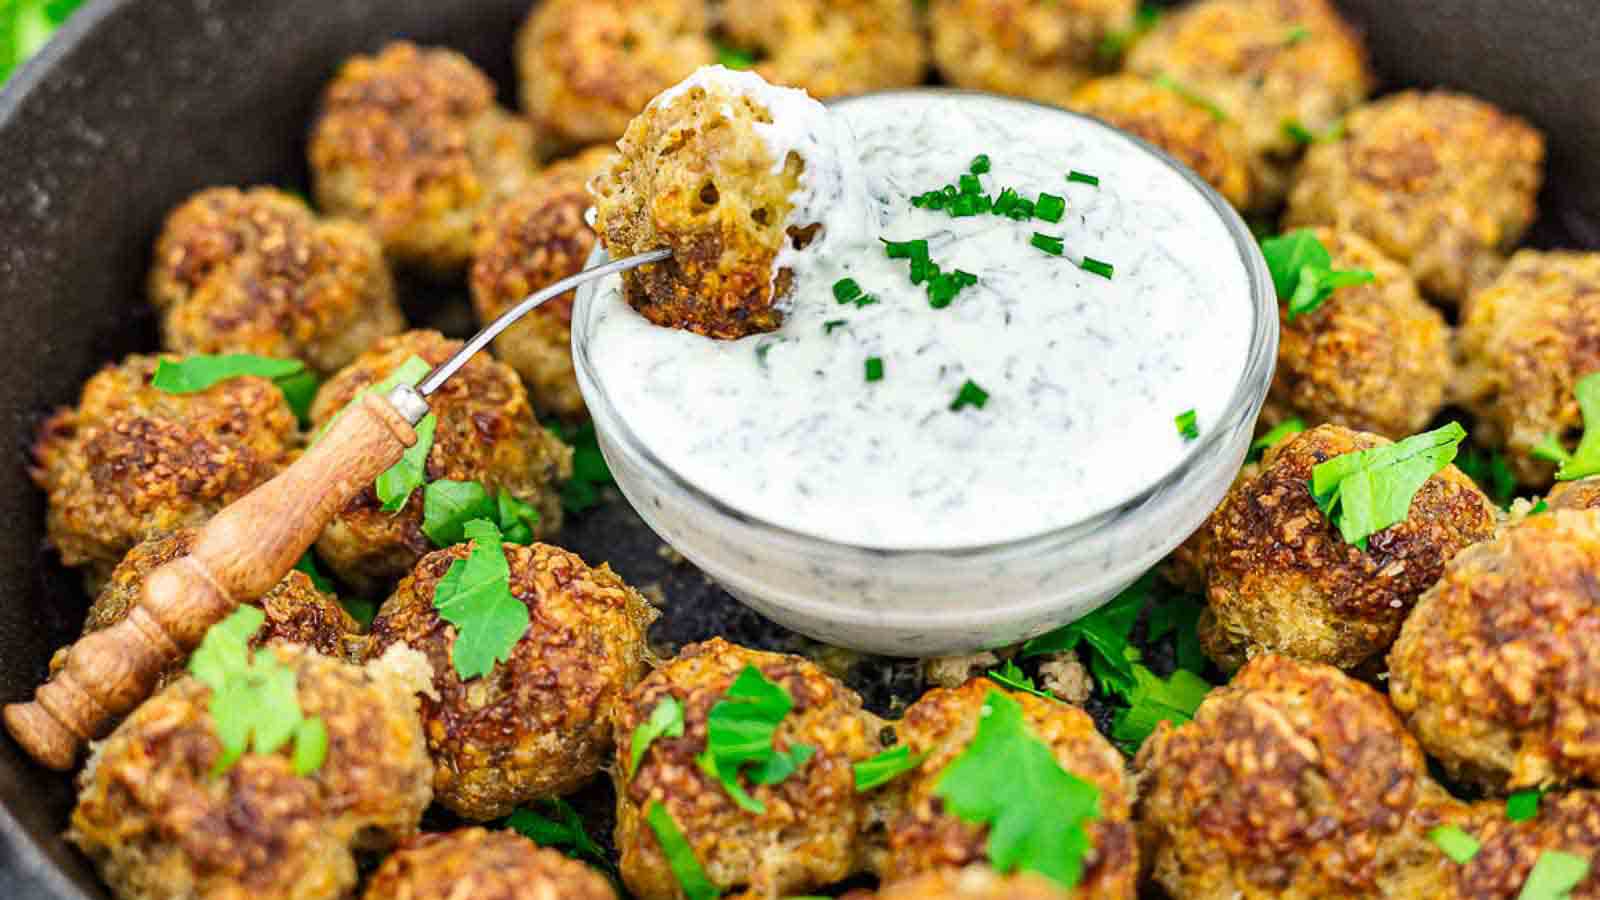 <p>Indulge in the savory delight of our Savory Sausage Nuggets – these bite-sized wonders are high on taste and low on carbs. Made with premium sausage and flavorful spices, they’re a protein-packed snack option that won’t derail your low-carb journey. Whether it’s game night or a quick bite, these nuggets bring the savory goodness you crave.</p><p><strong>Get the Recipe: </strong><a href="https://www.lowcarb-nocarb.com/low-carb-sausage-balls/?utm_source=msn&utm_medium=page&utm_campaign=msn">Savory Sausage Balls</a></p>